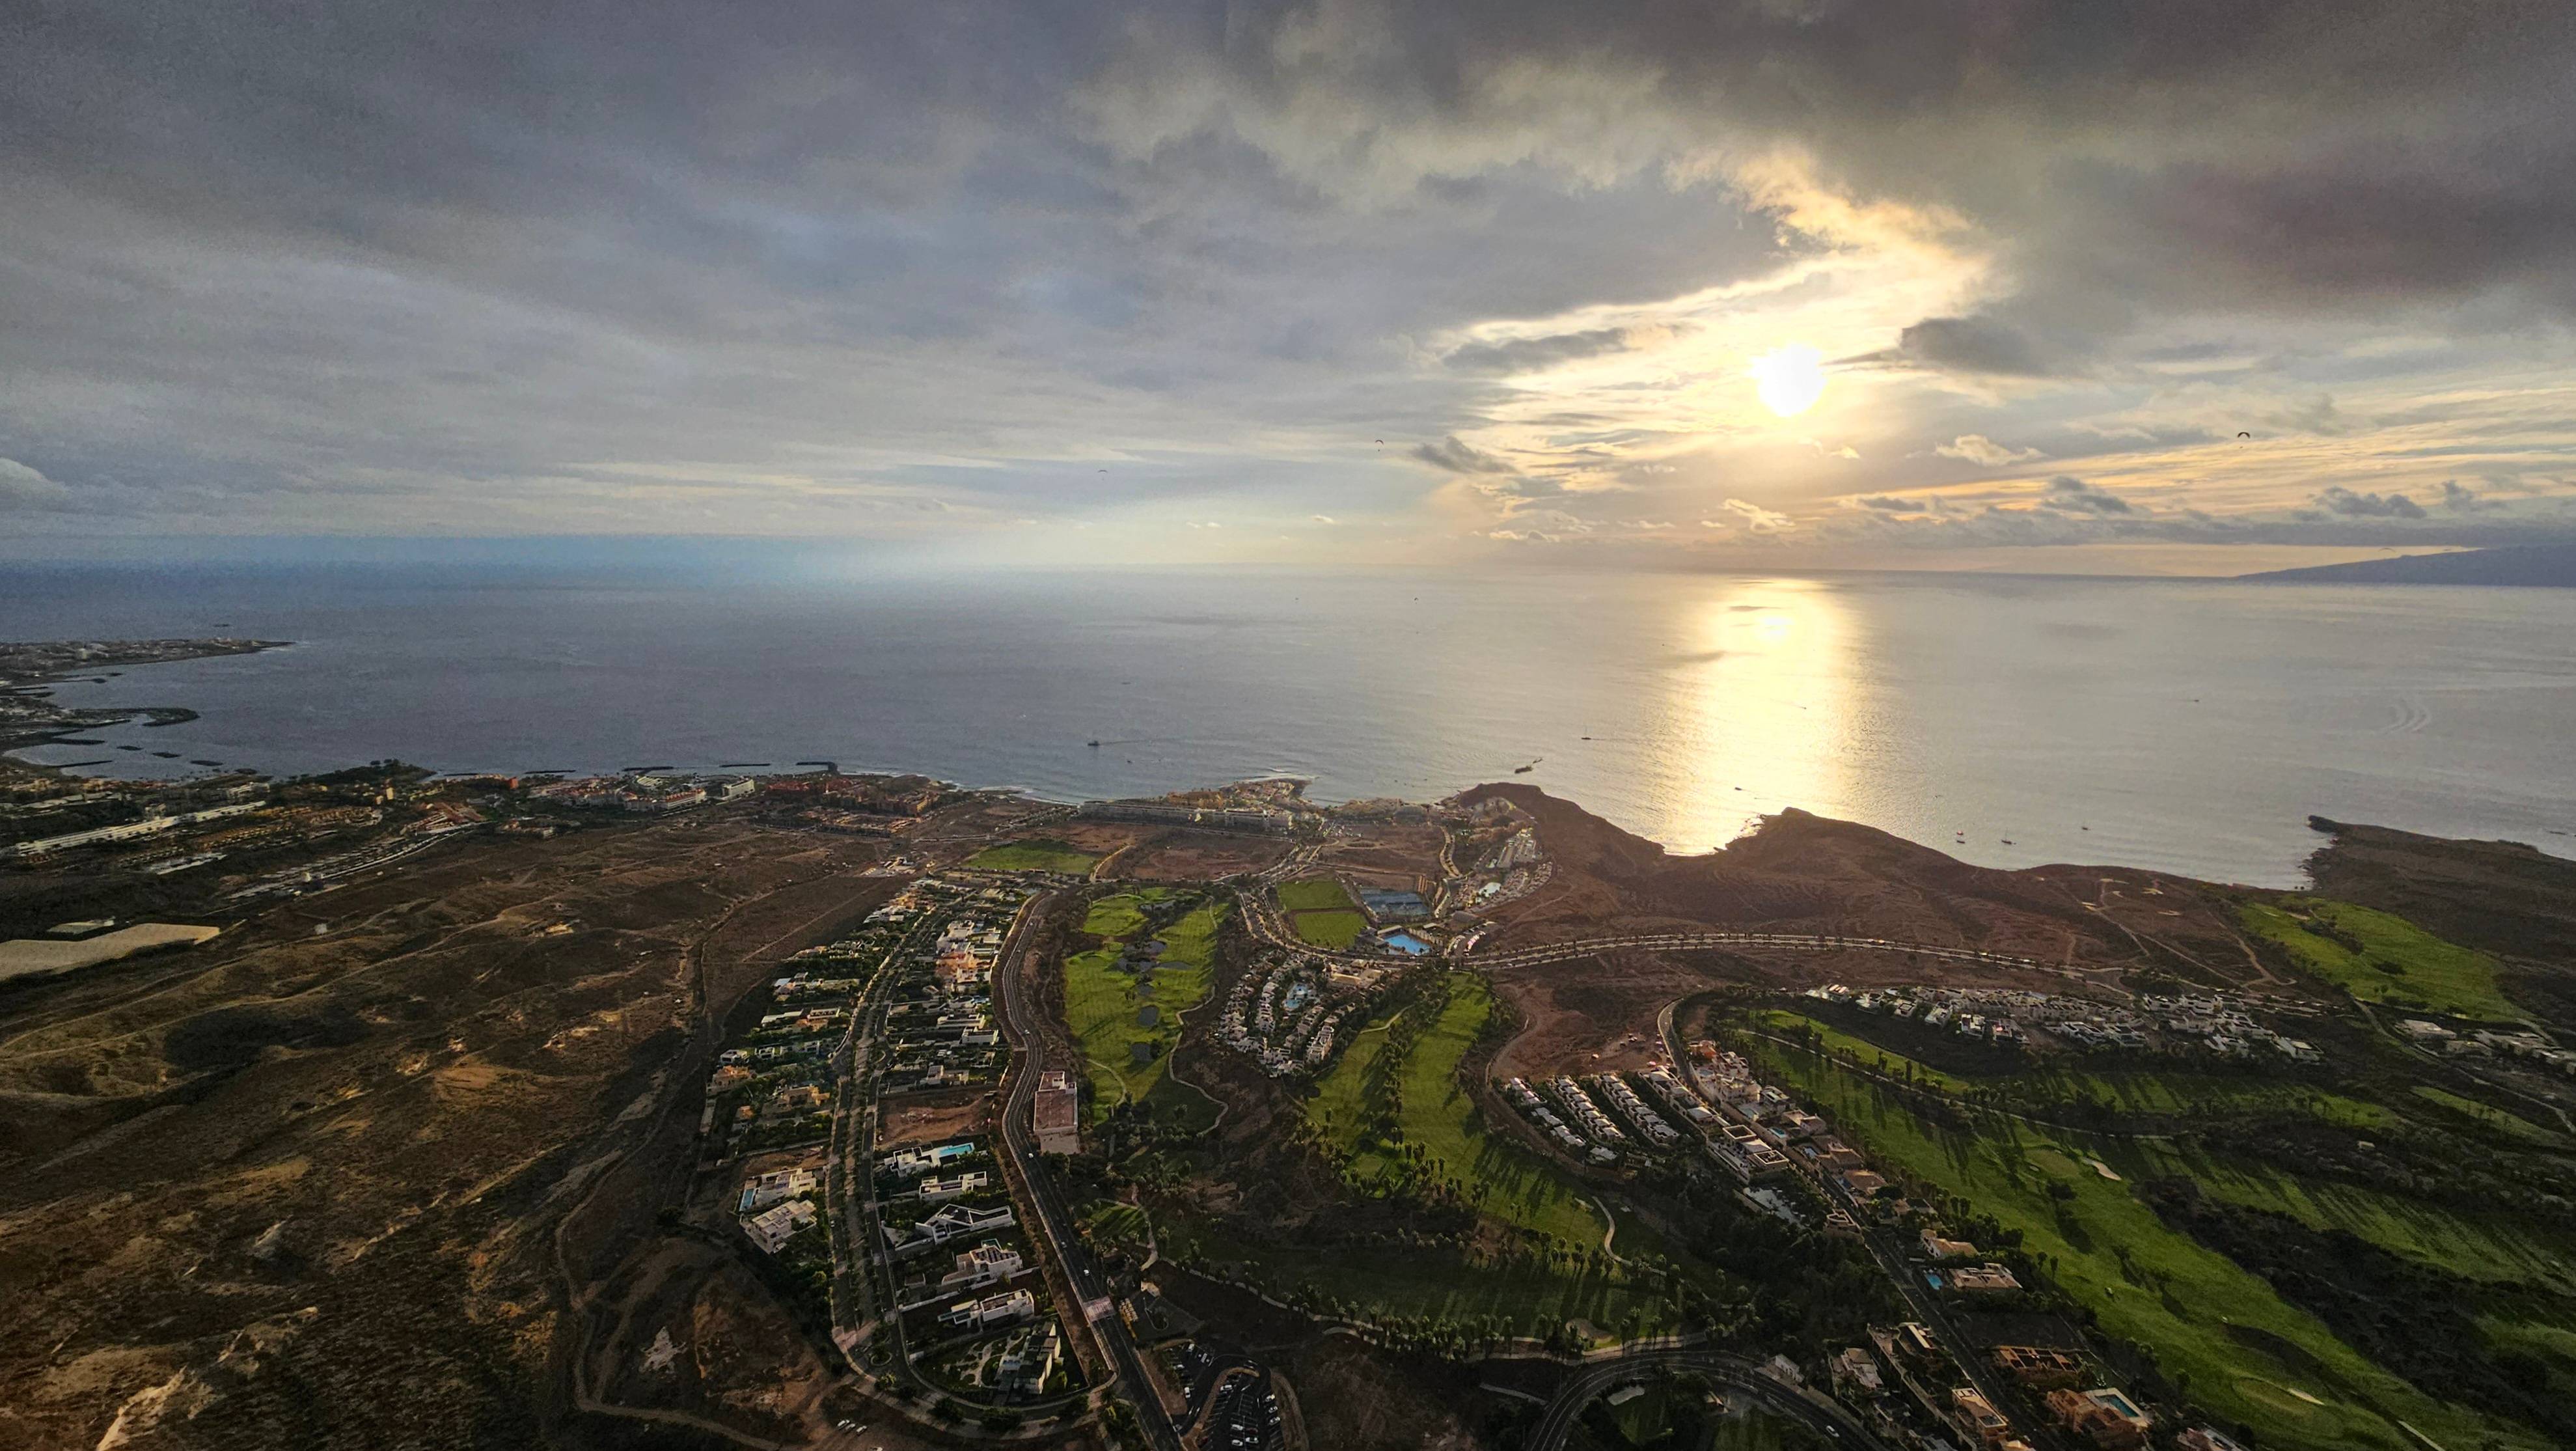 Picture from Area related to Roque Morro Negro, Miraverde, Los Cristianos shoot by Romano Serra